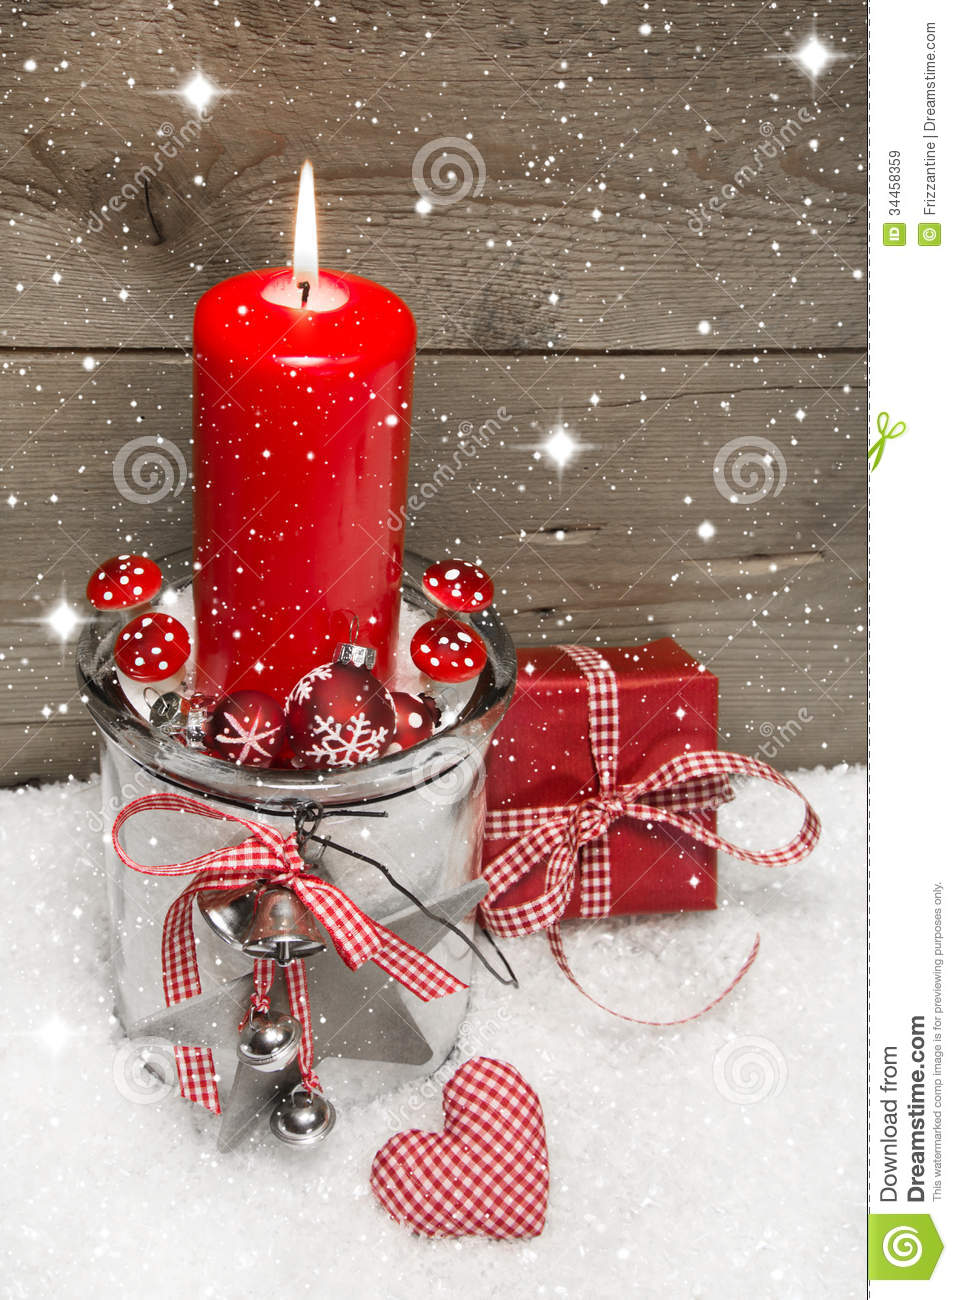 Background With A Red Candle And A Gift Box On Snow For A Rustic